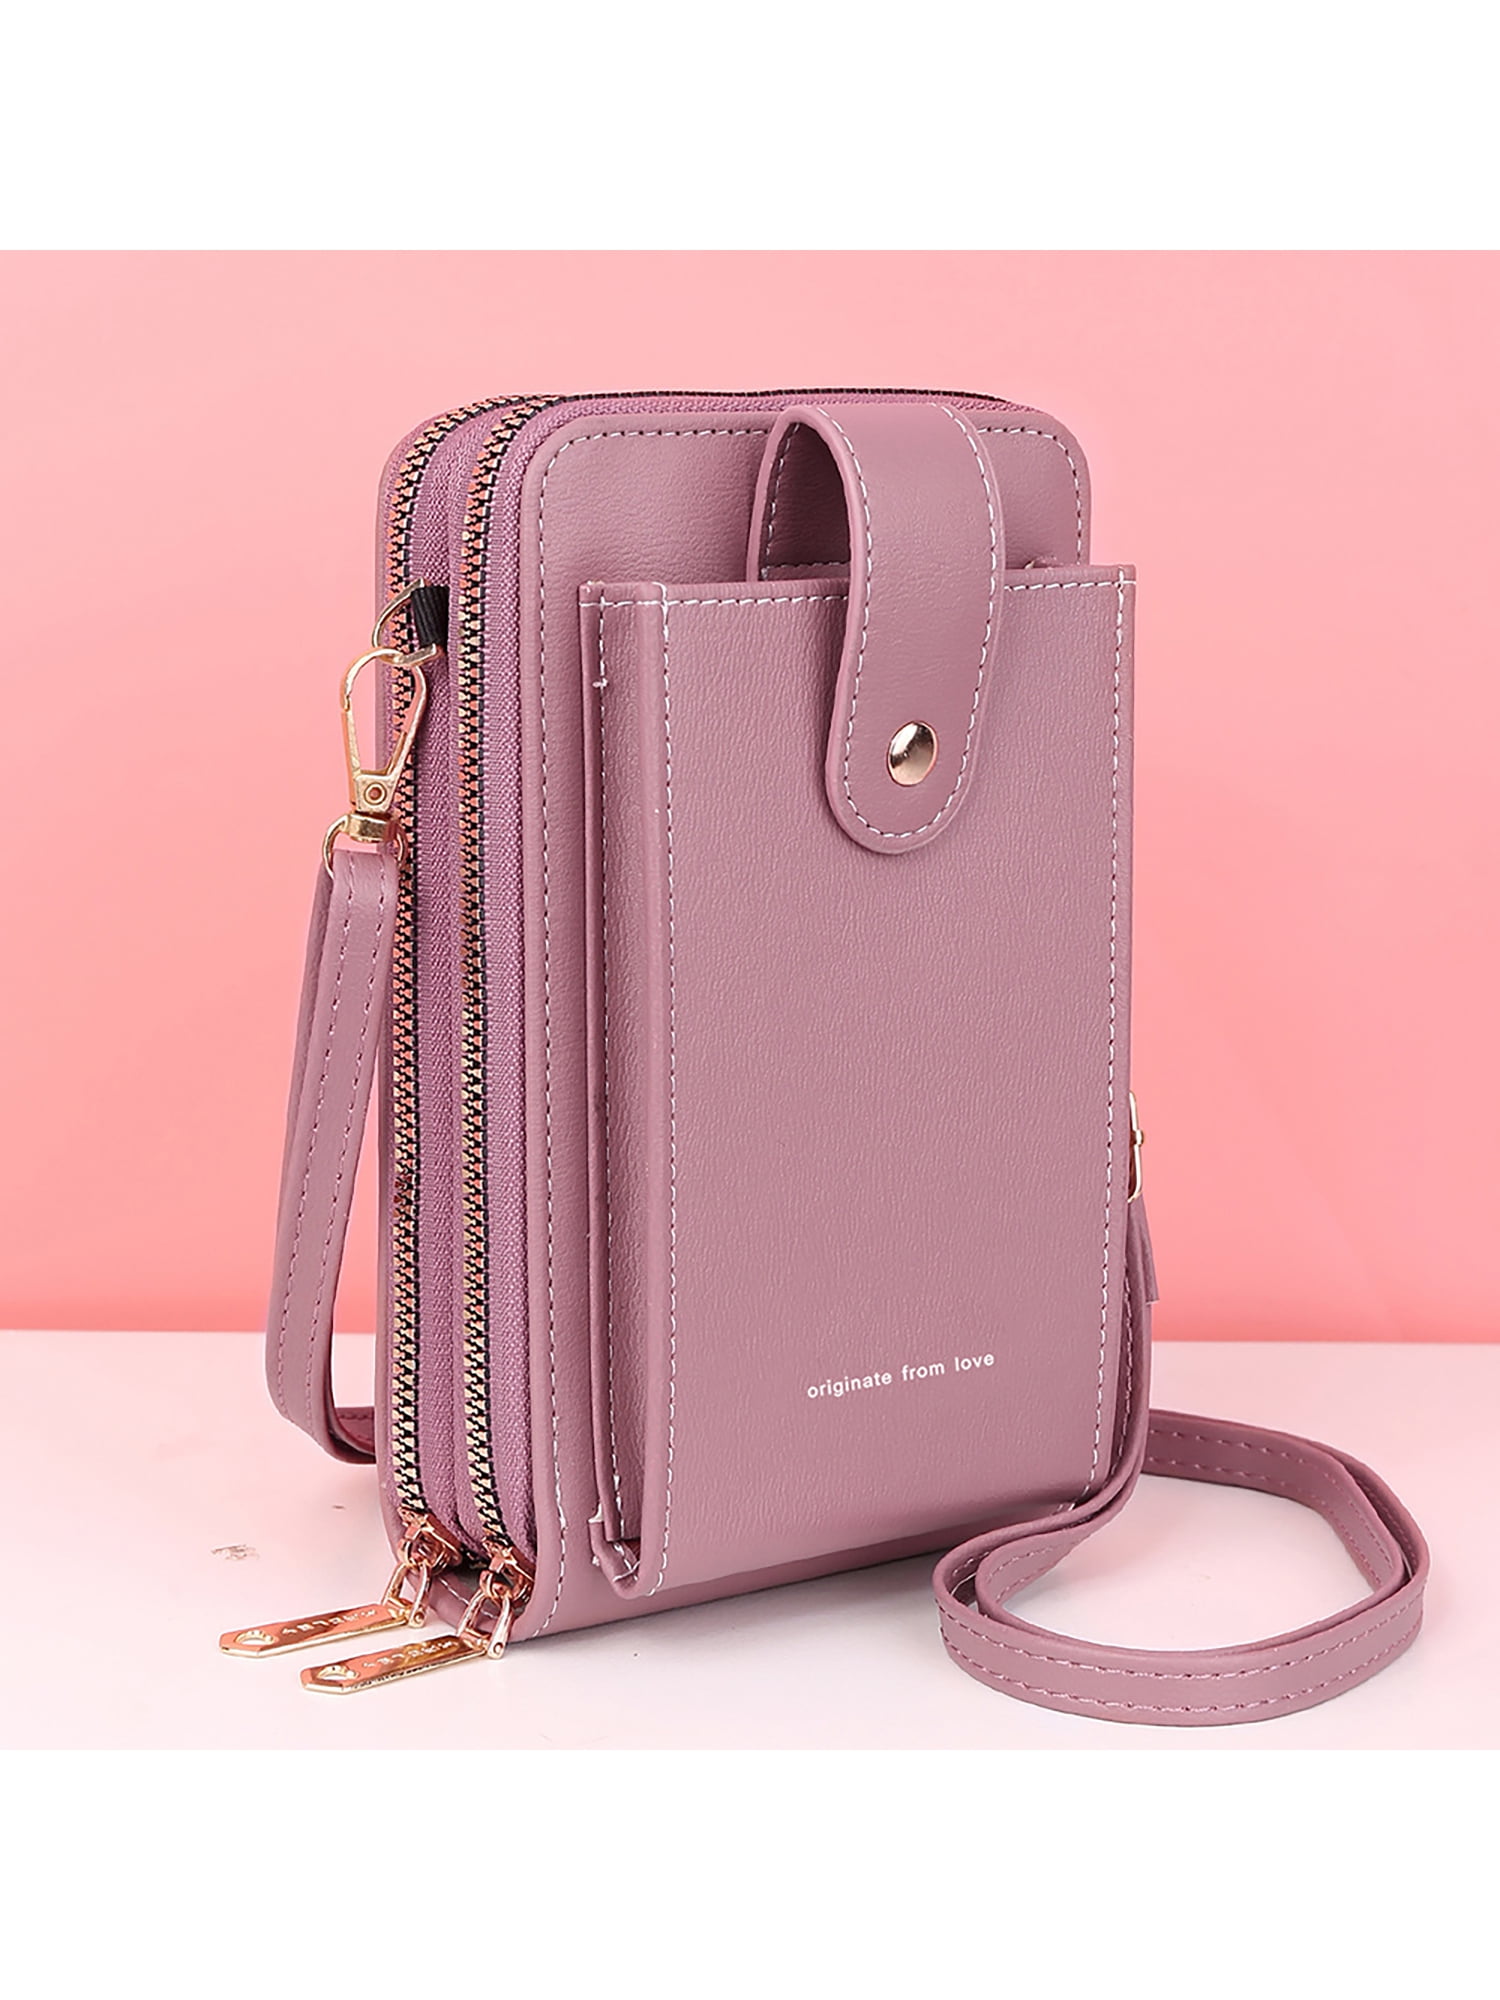 Luxury Designer Crossbody Purse With Adjustable Chains, Detachable Canvas A  Strap, And Multi Pochette Accessoires High Quality Messenger Bag For Women  From Bagsgood02, $33.95